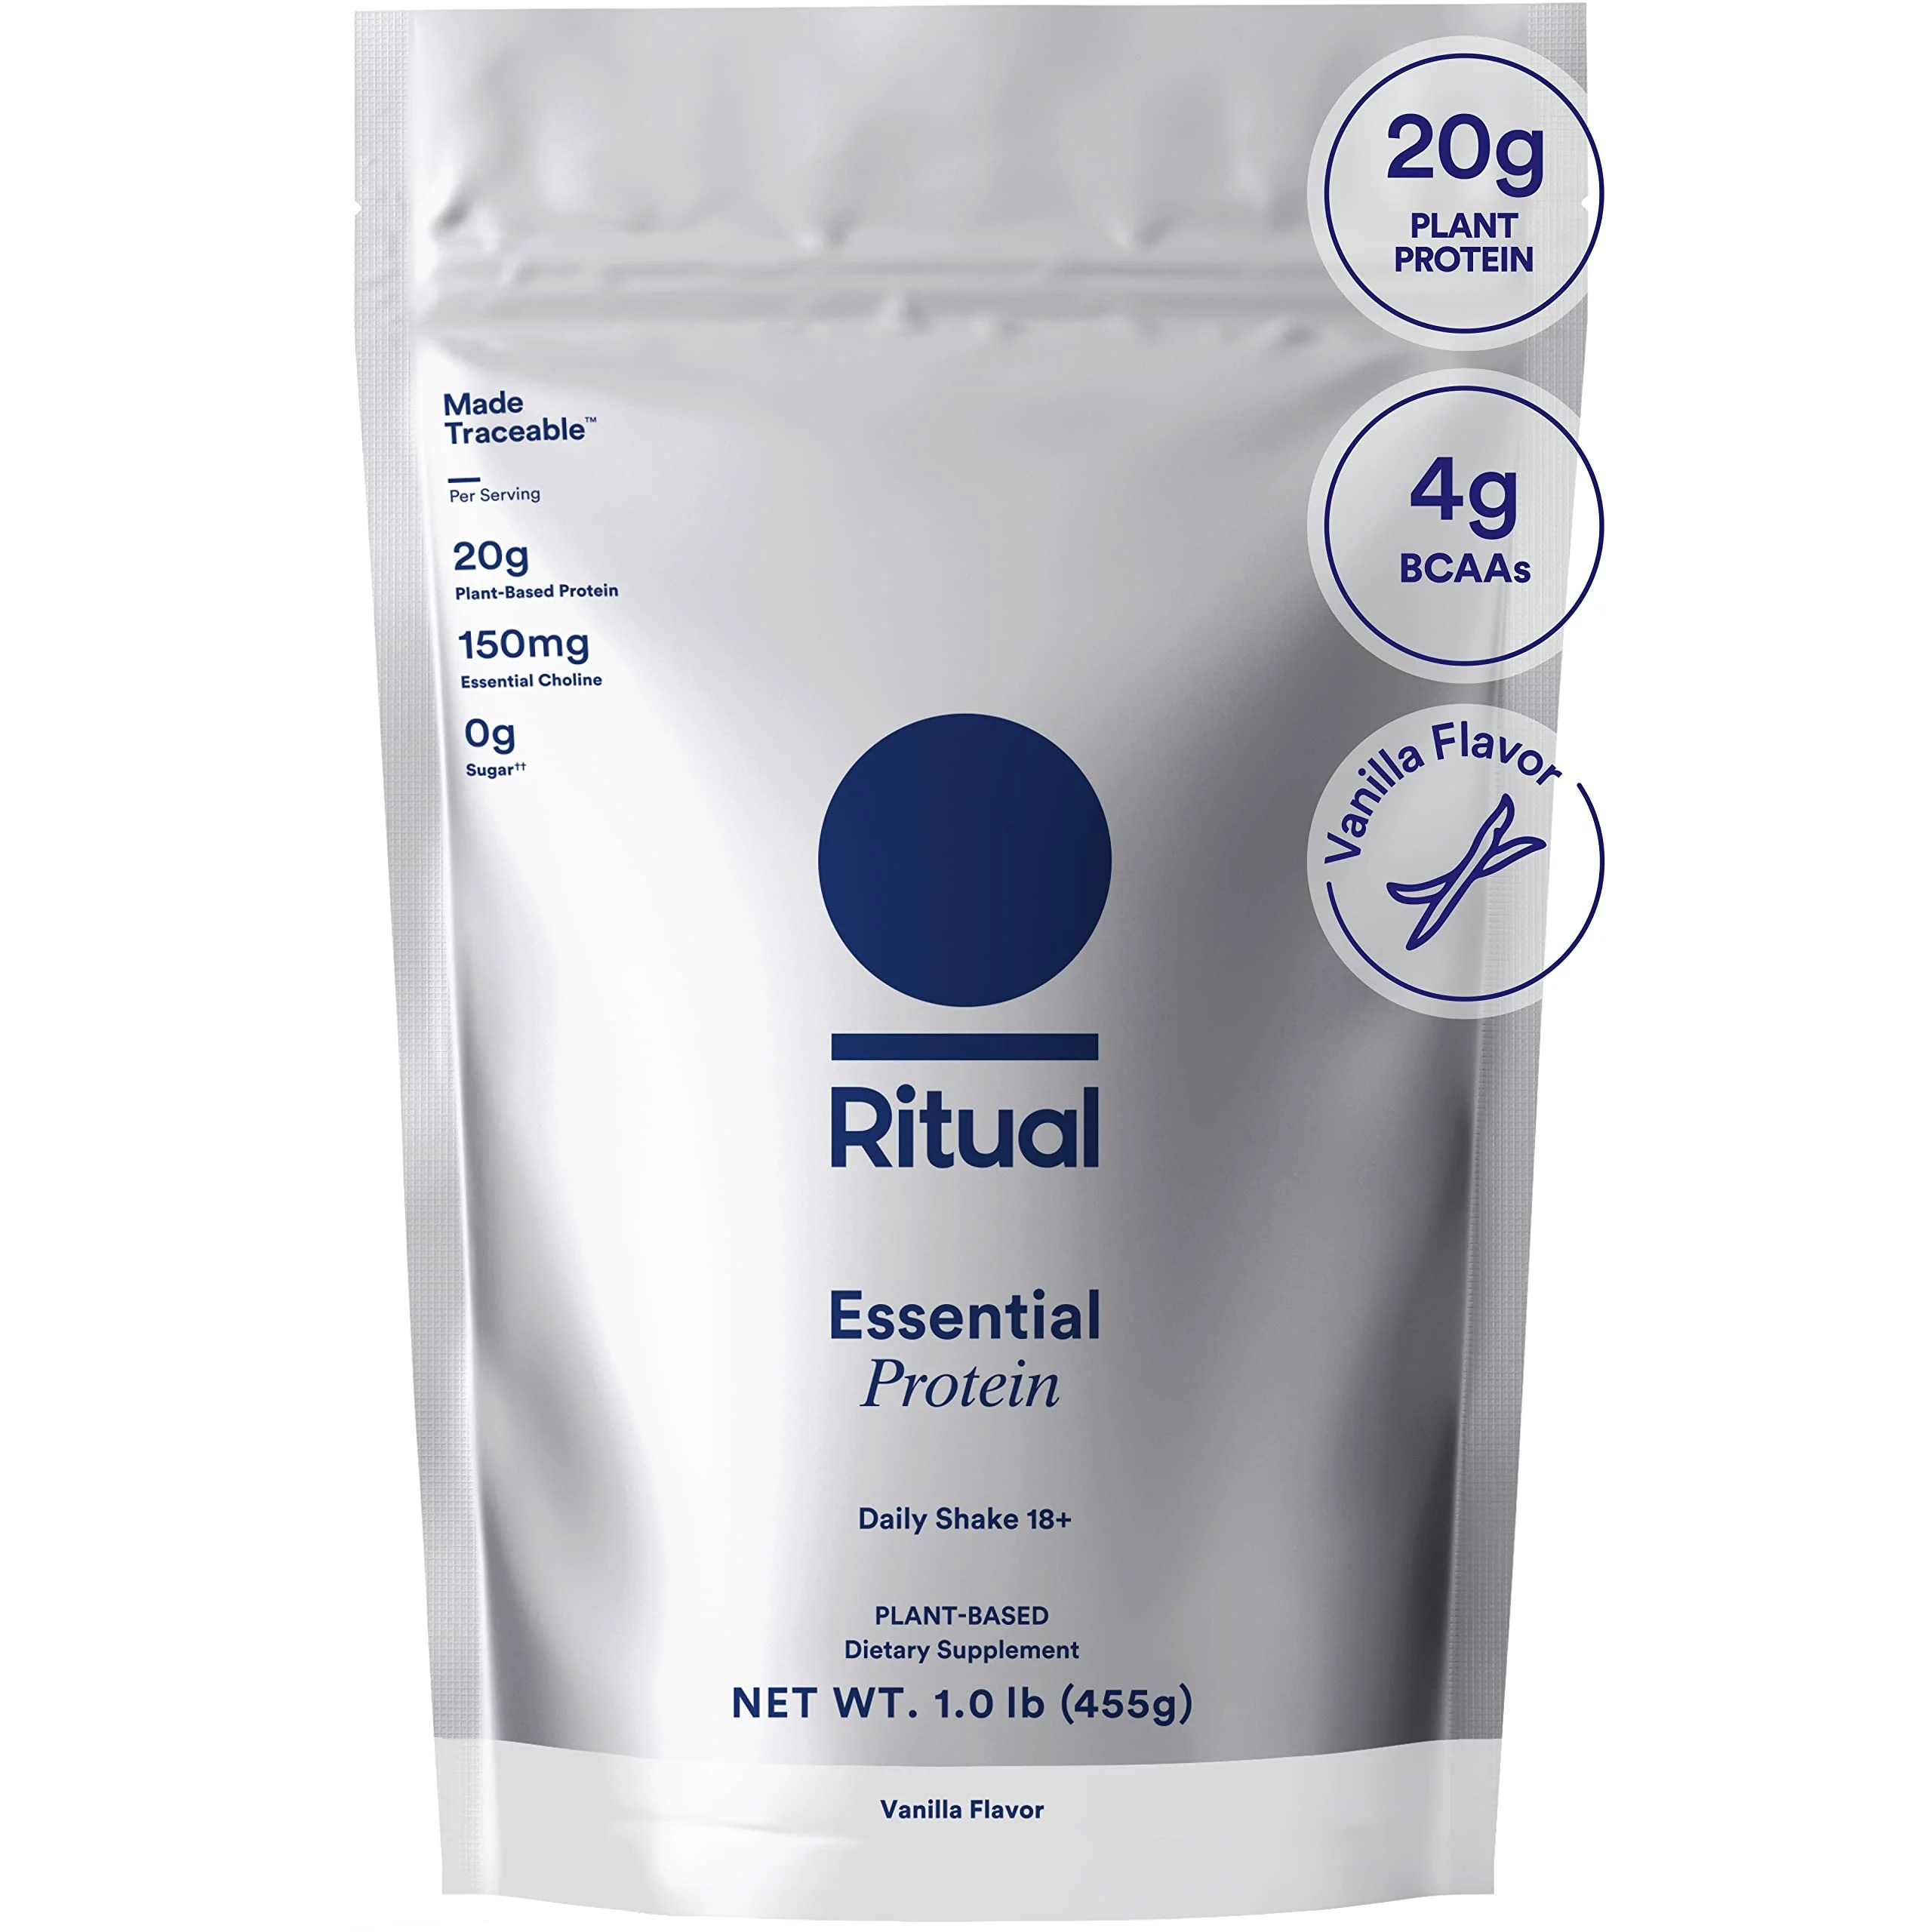 Ritual Essential Protein Daily Shake 18+